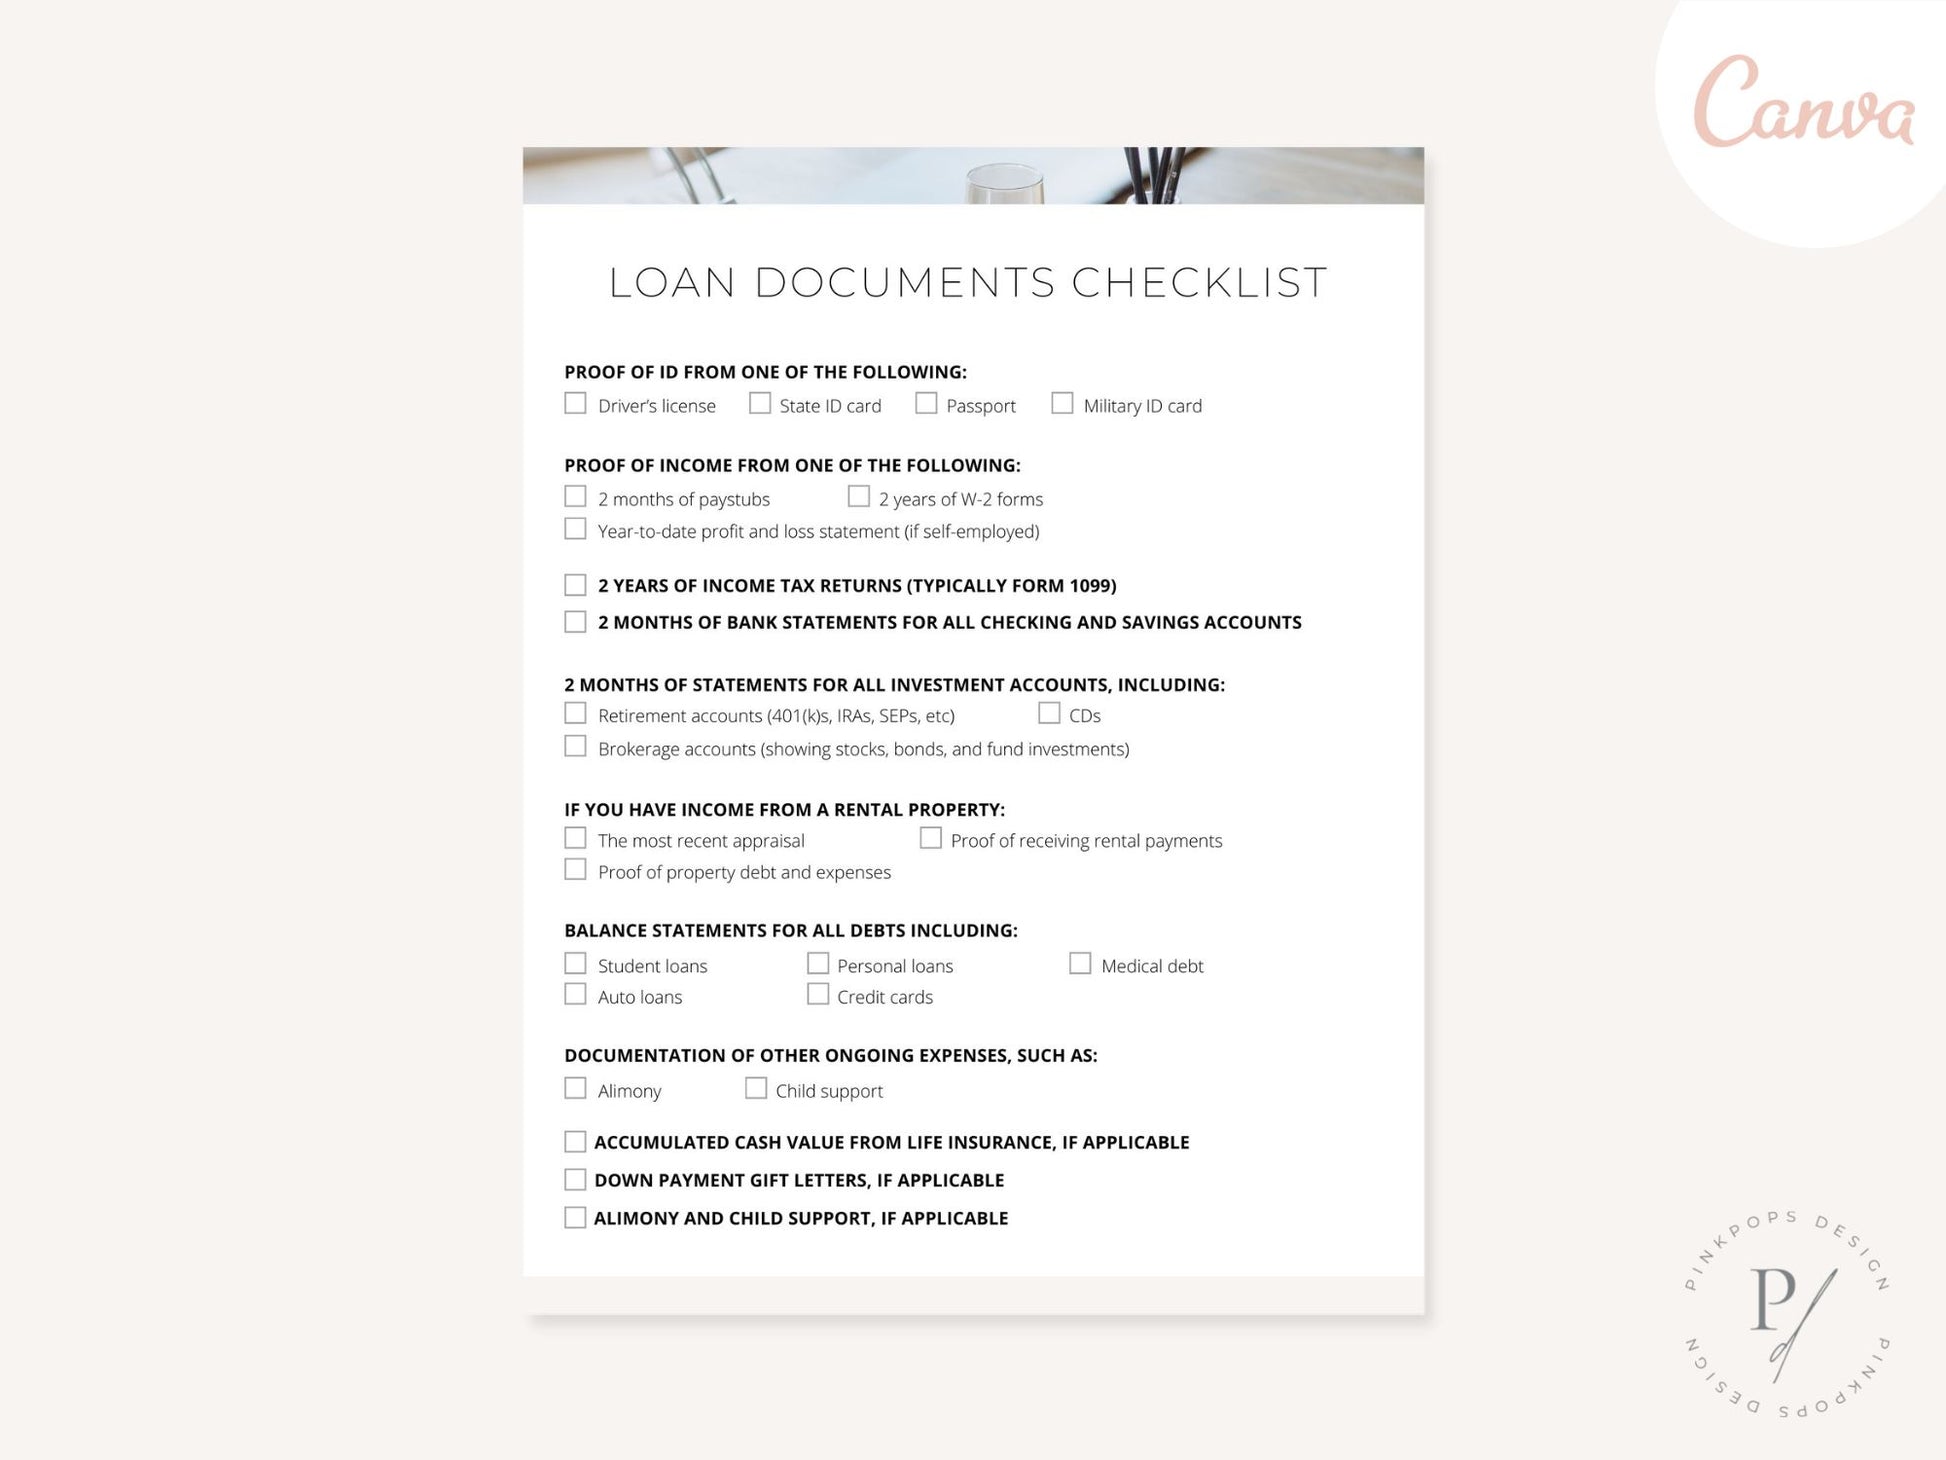 Minimal Loan Documents Checklist - Streamlined toolkit for efficient loan application and financial success.